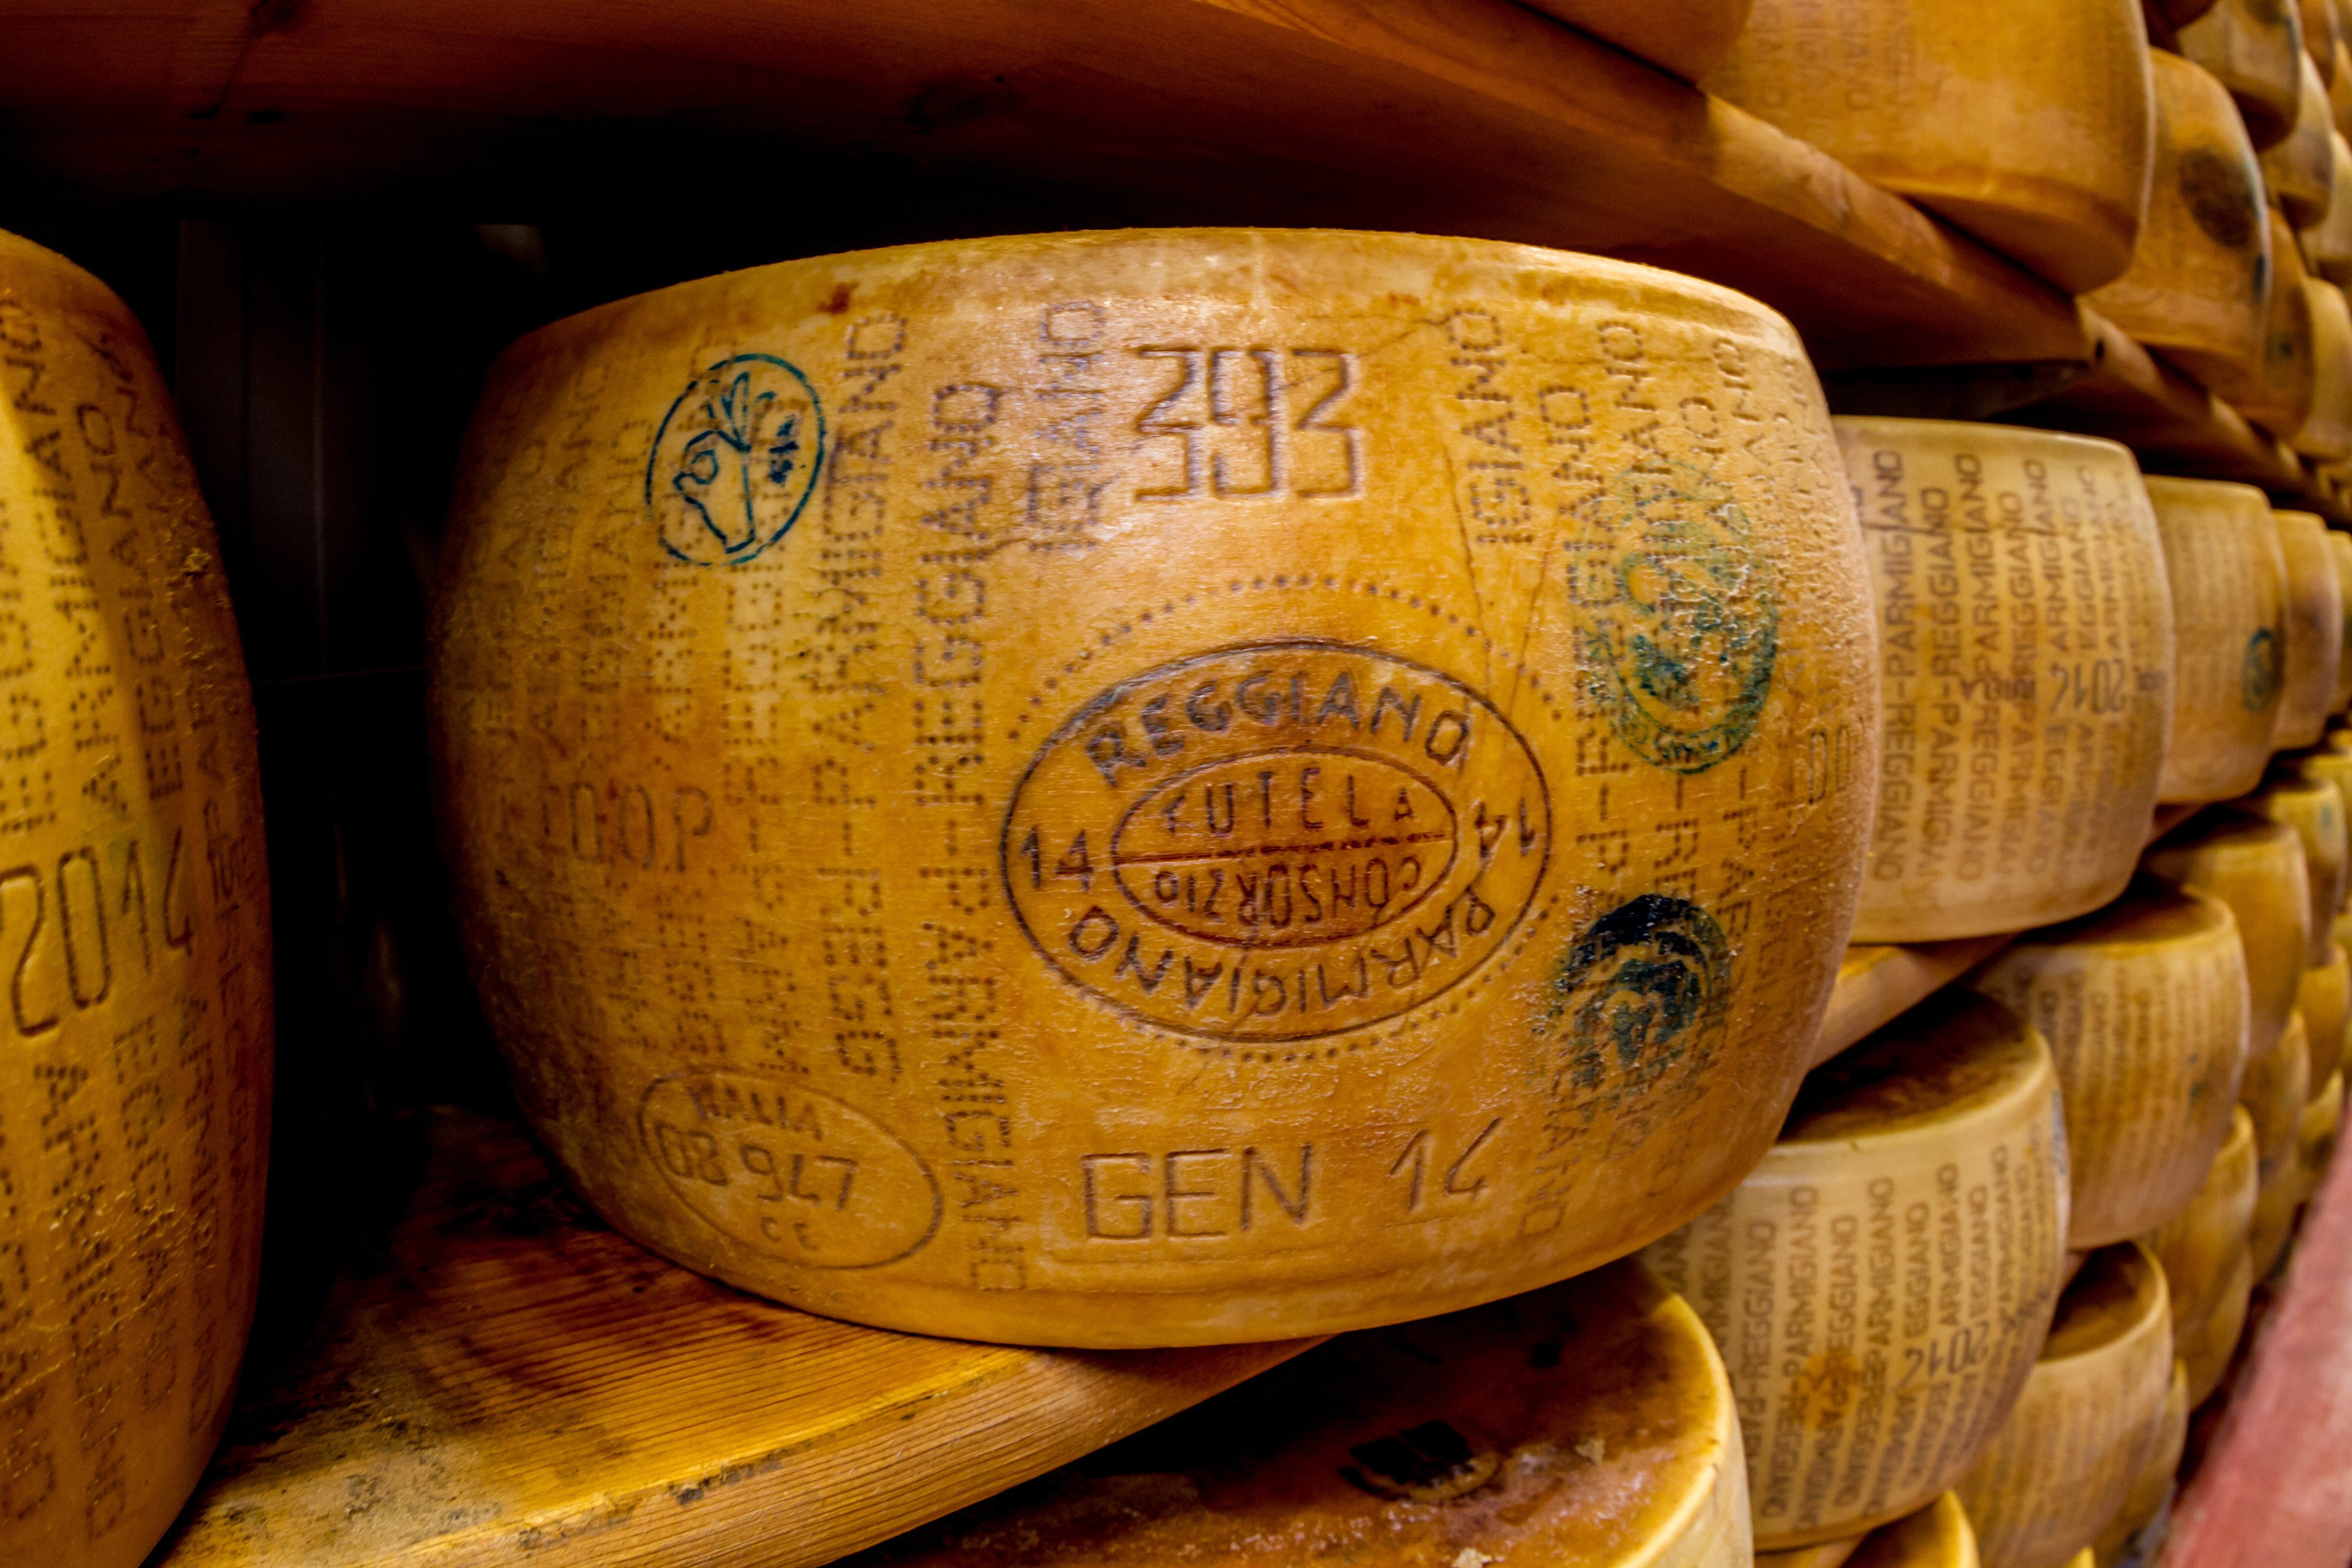 Parmesan cheese wheels stored for ageing. Photo: Getty Images